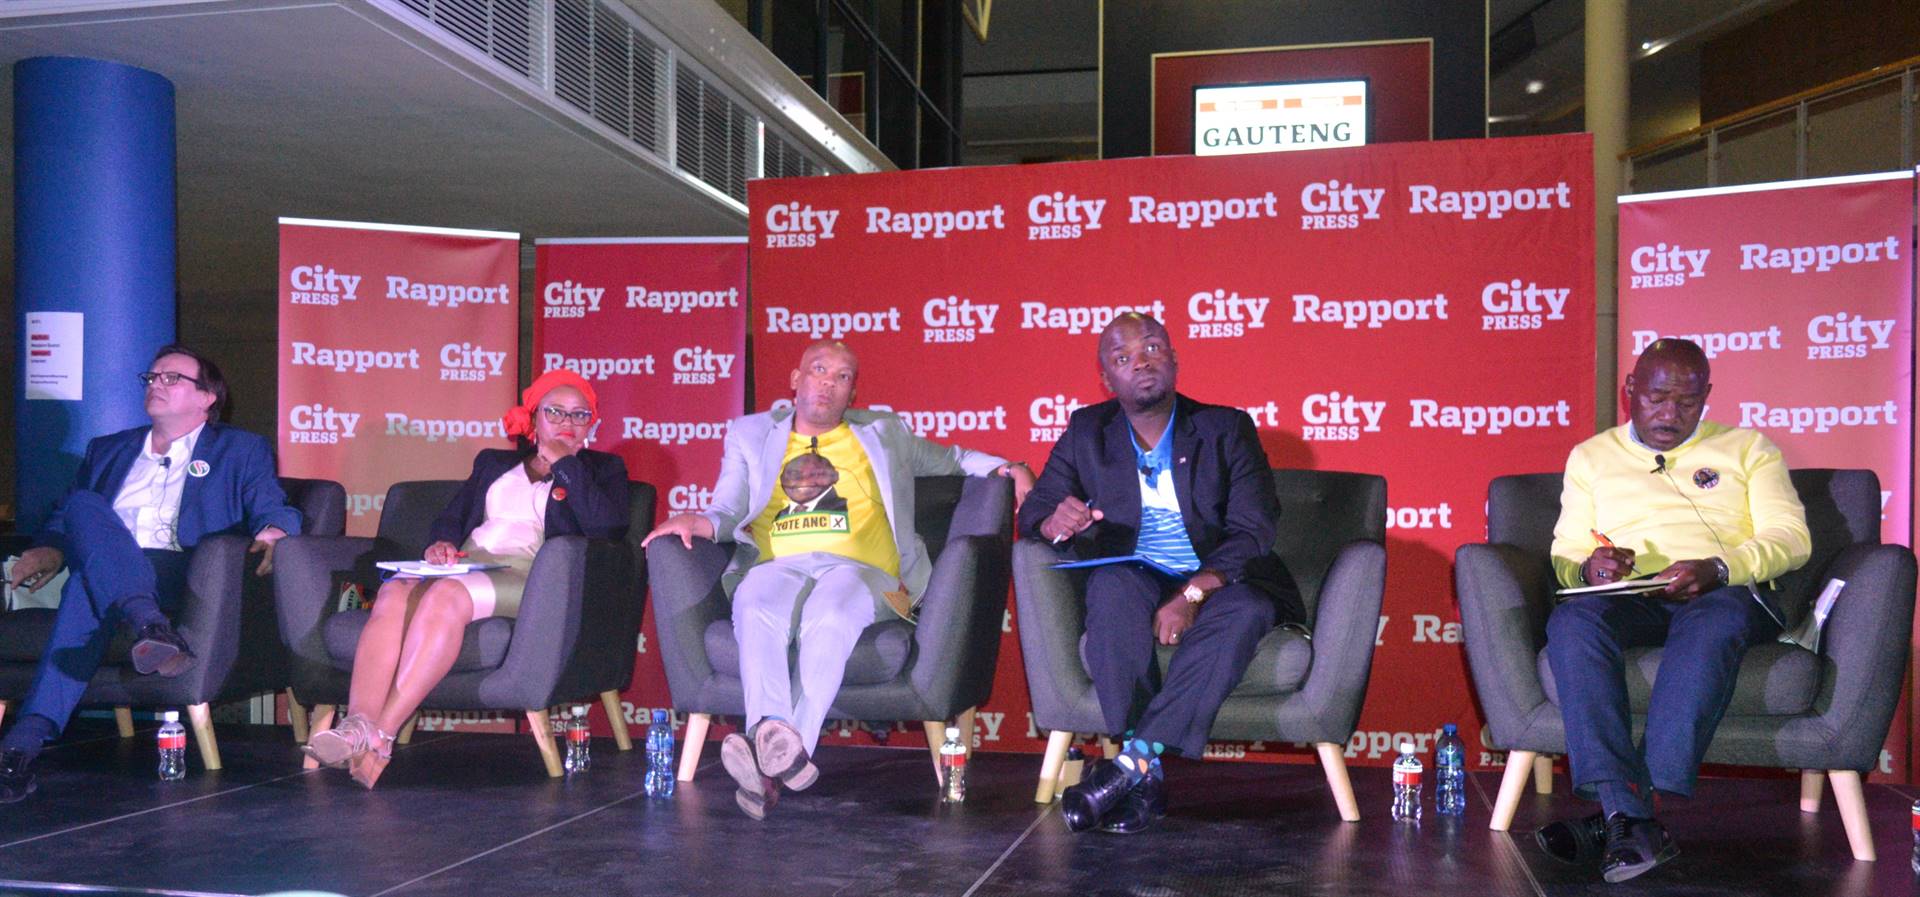 Representatives from the various parties at the #BattlegroundGauteng debate on Tuesday. From left: Freedom Front plus MP Anton Alberts, EFF Gauteng chairperson Mandisa Mashego, former Tshwane mayor and ANC member Kgosientso Ramokgopa, DA Gauteng premier candidate Solly Msimanga, and IFP’s Bonginkosi Dlamini. Picture: Palesa Dlamini/City Press